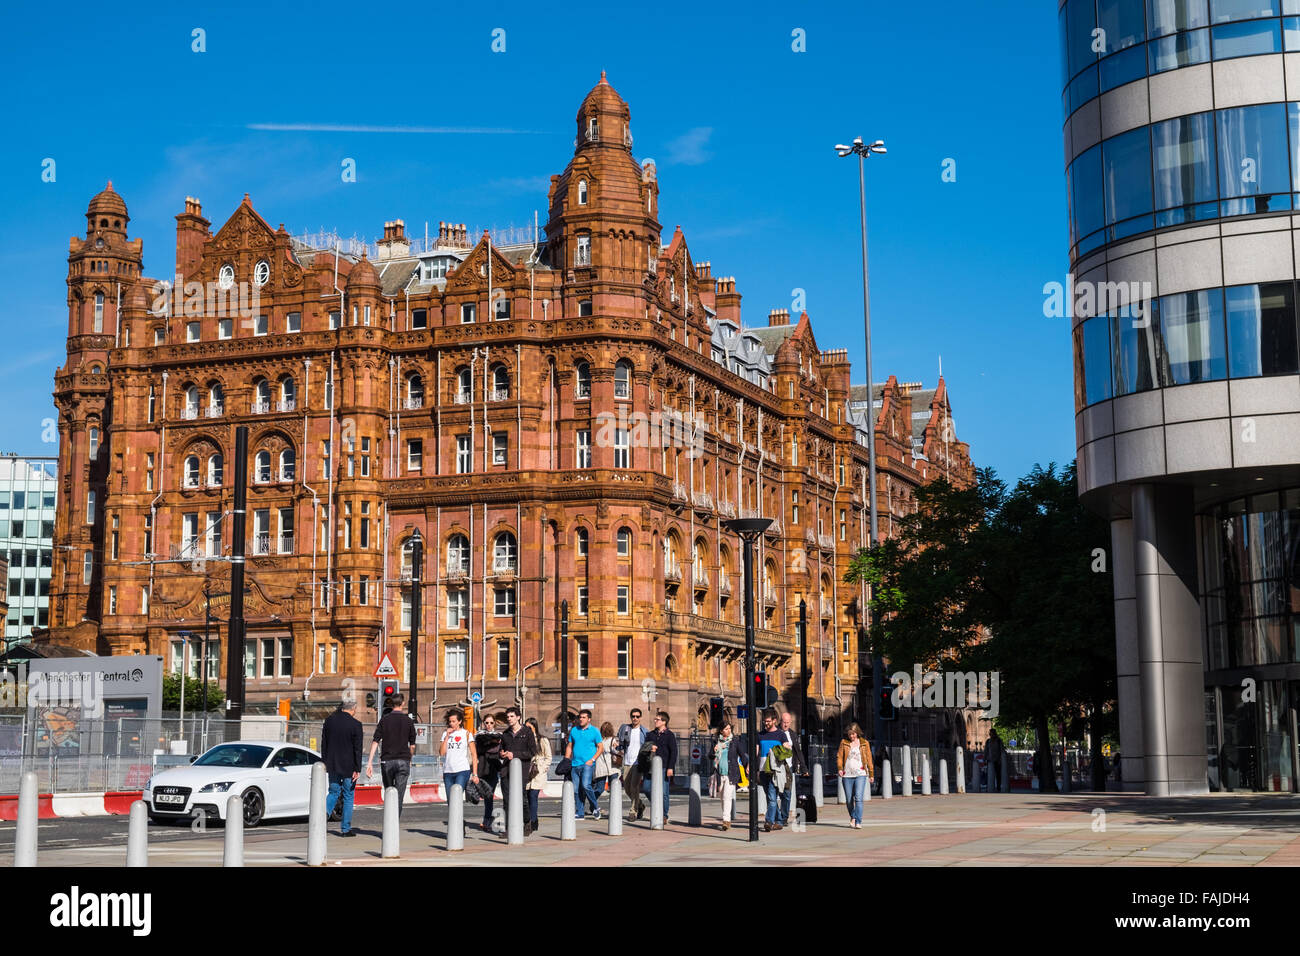 The Rear Elevation of the Midland Hotel, Manchester, UK. Stock Photo